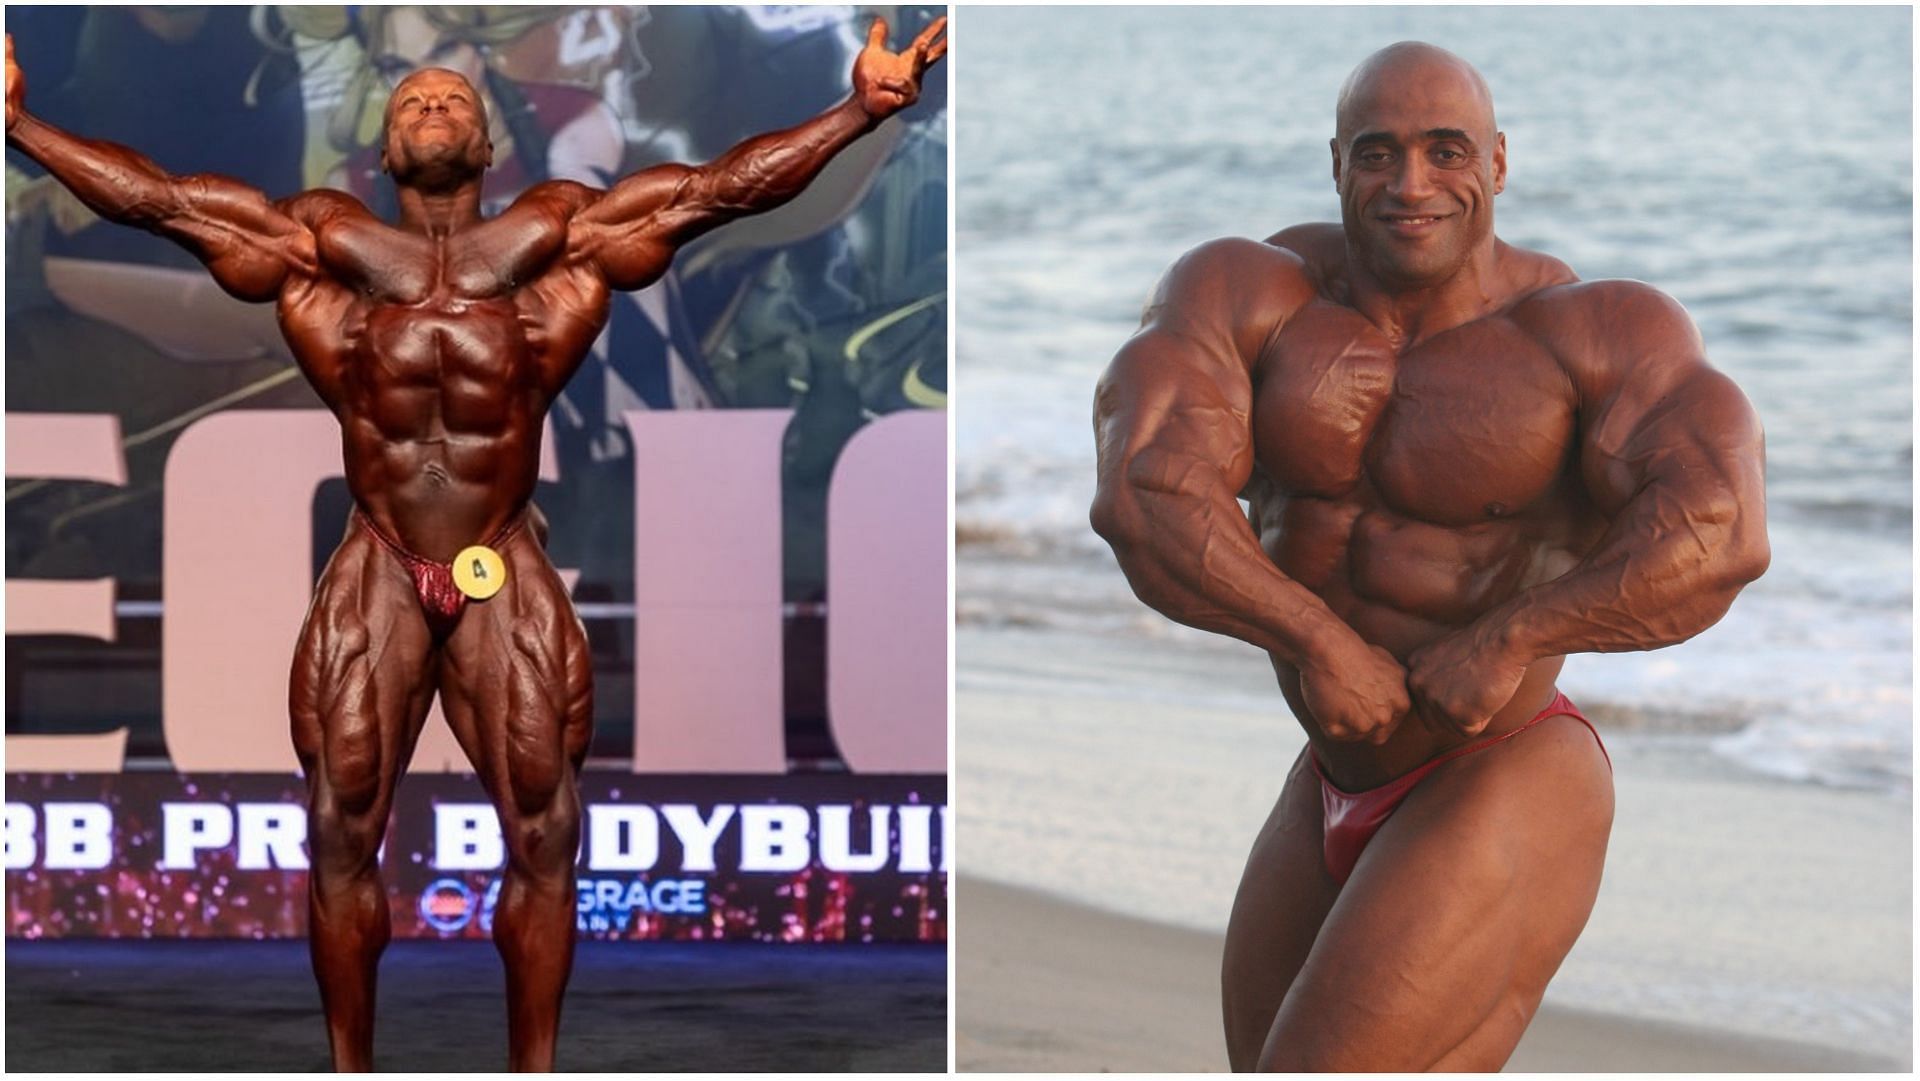 Timing is everything” - Shaun Clarida to make Open Mr. Olympia